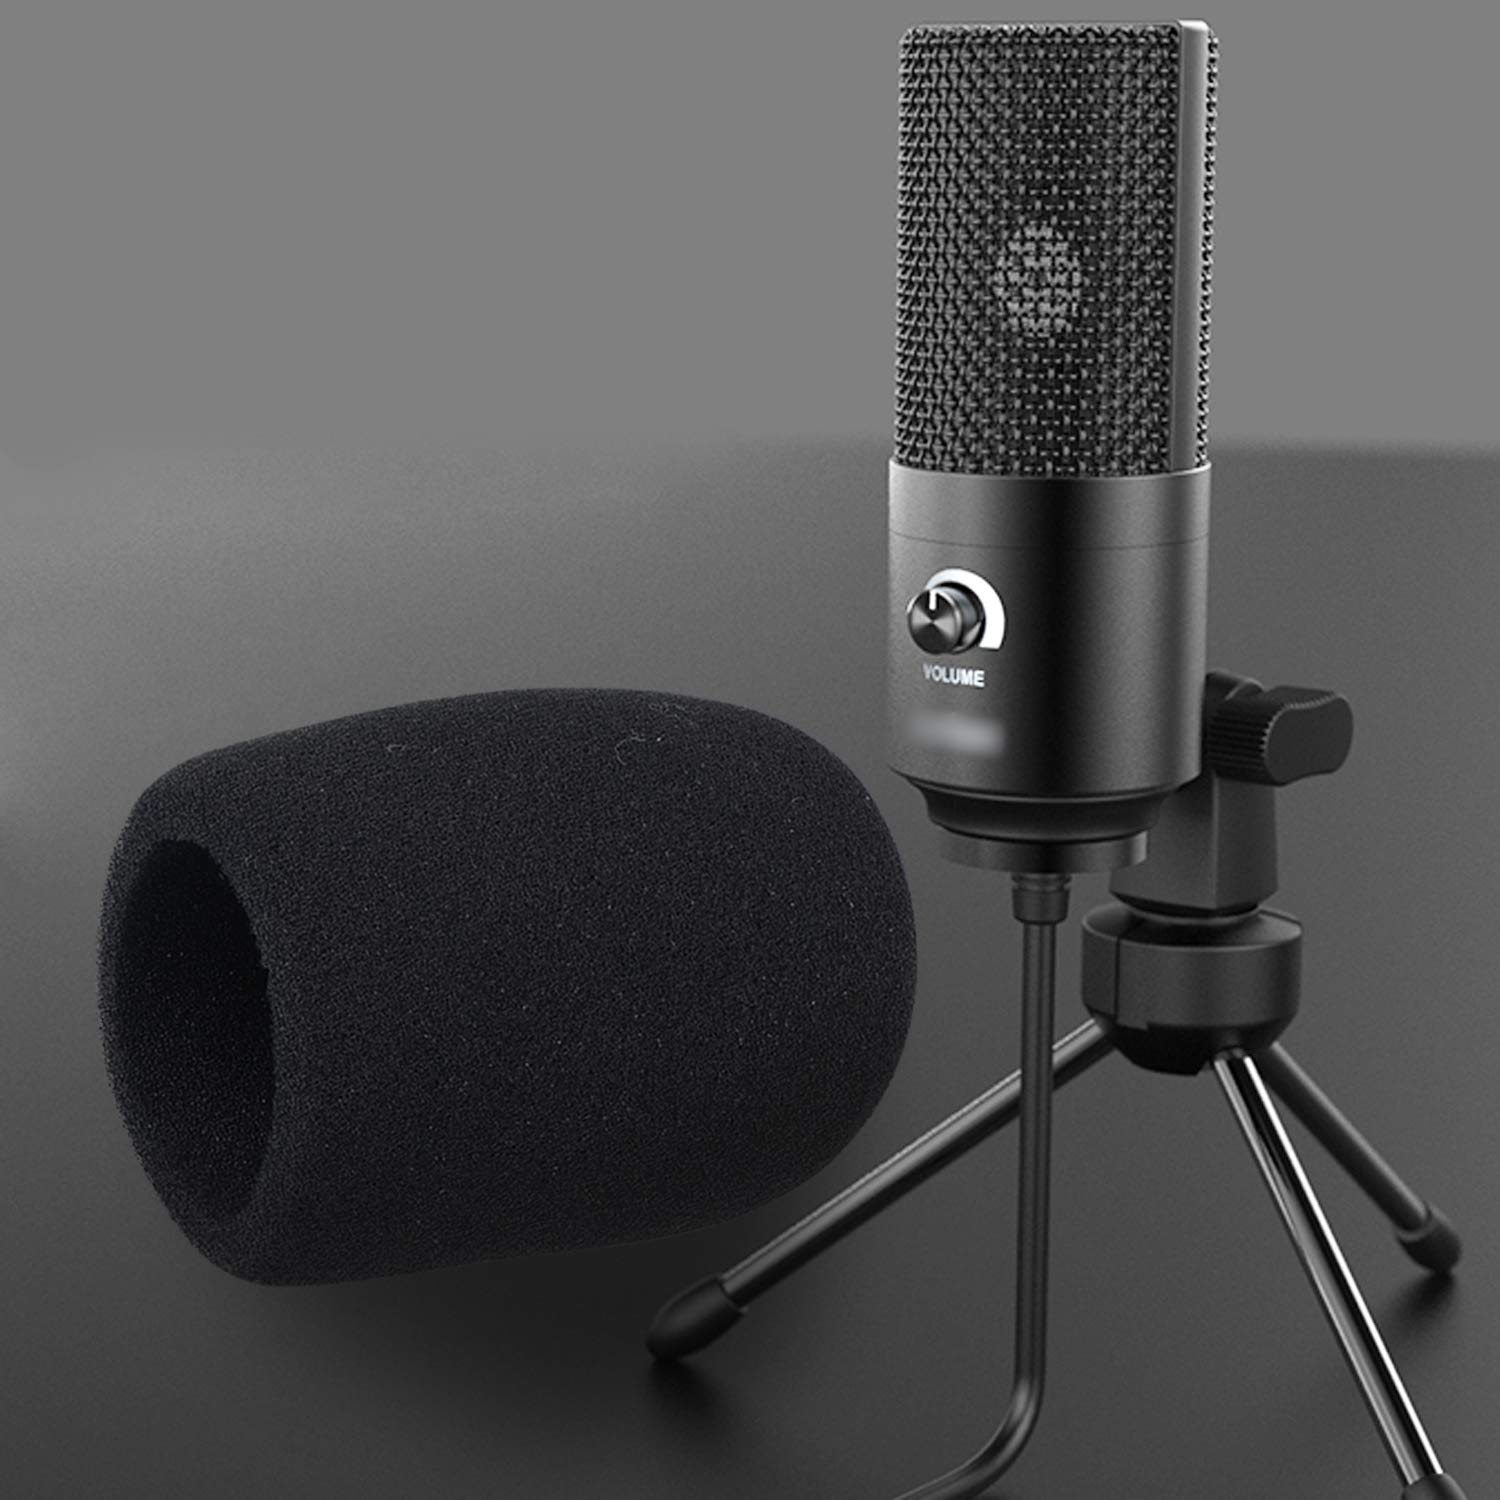 K669 Foam Mic Windscreen, Pop Filter Wind Cover Compatible with Fifine USB Condenser Recording Microphone K669, T669, K669B by SUNMON